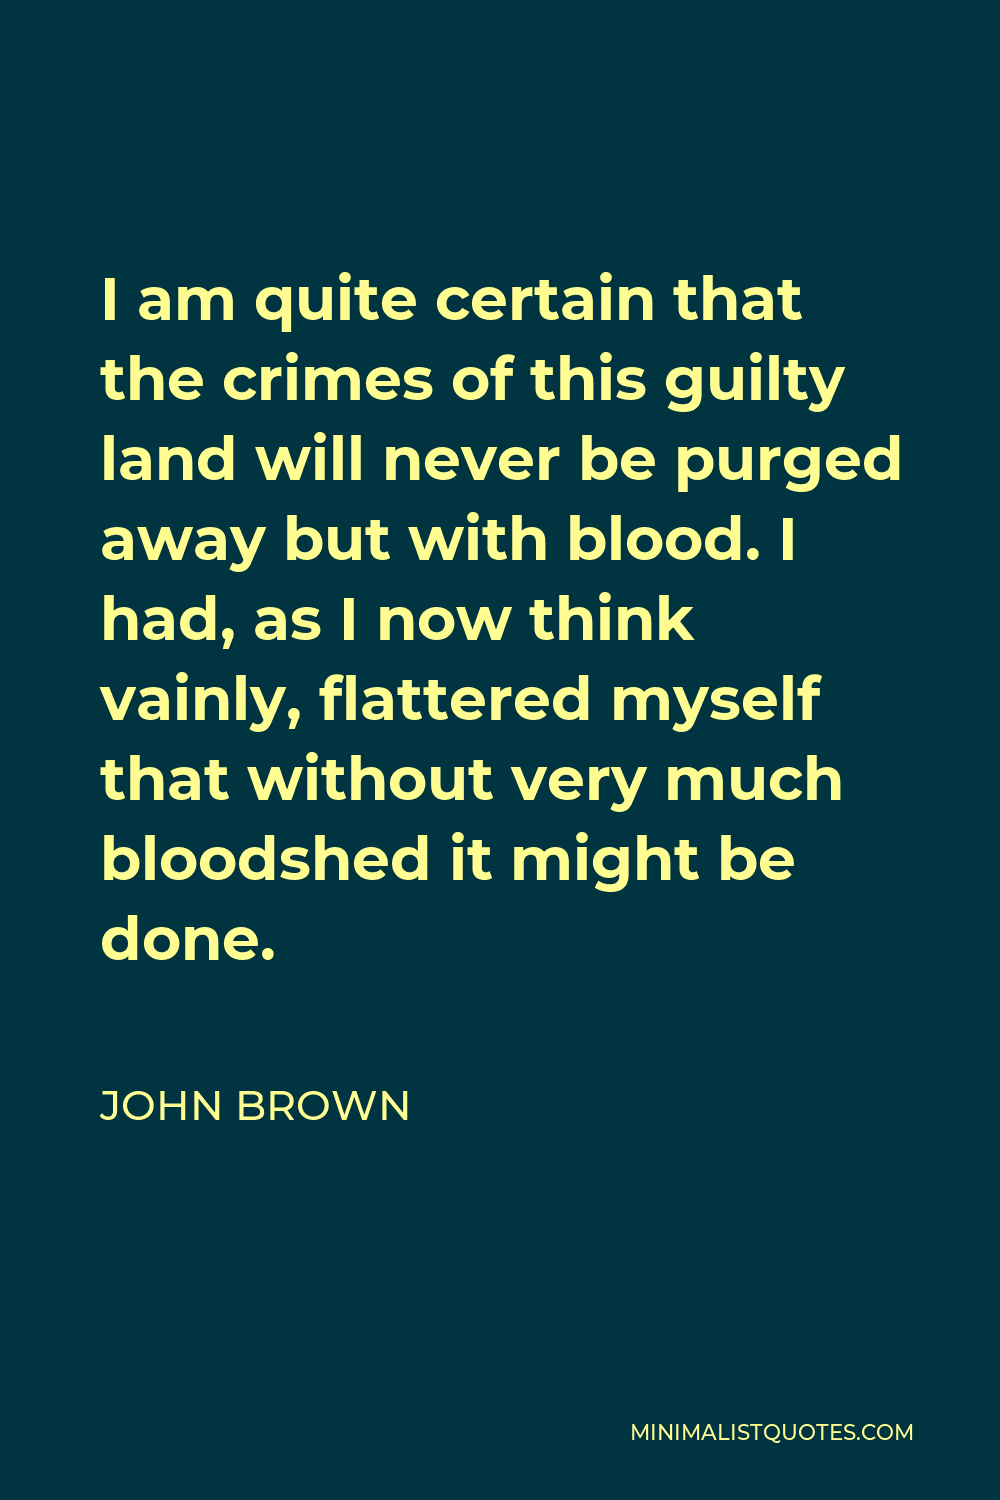 John Brown Quote - I am quite certain that the crimes of this guilty land will never be purged away but with blood. I had, as I now think vainly, flattered myself that without very much bloodshed it might be done.